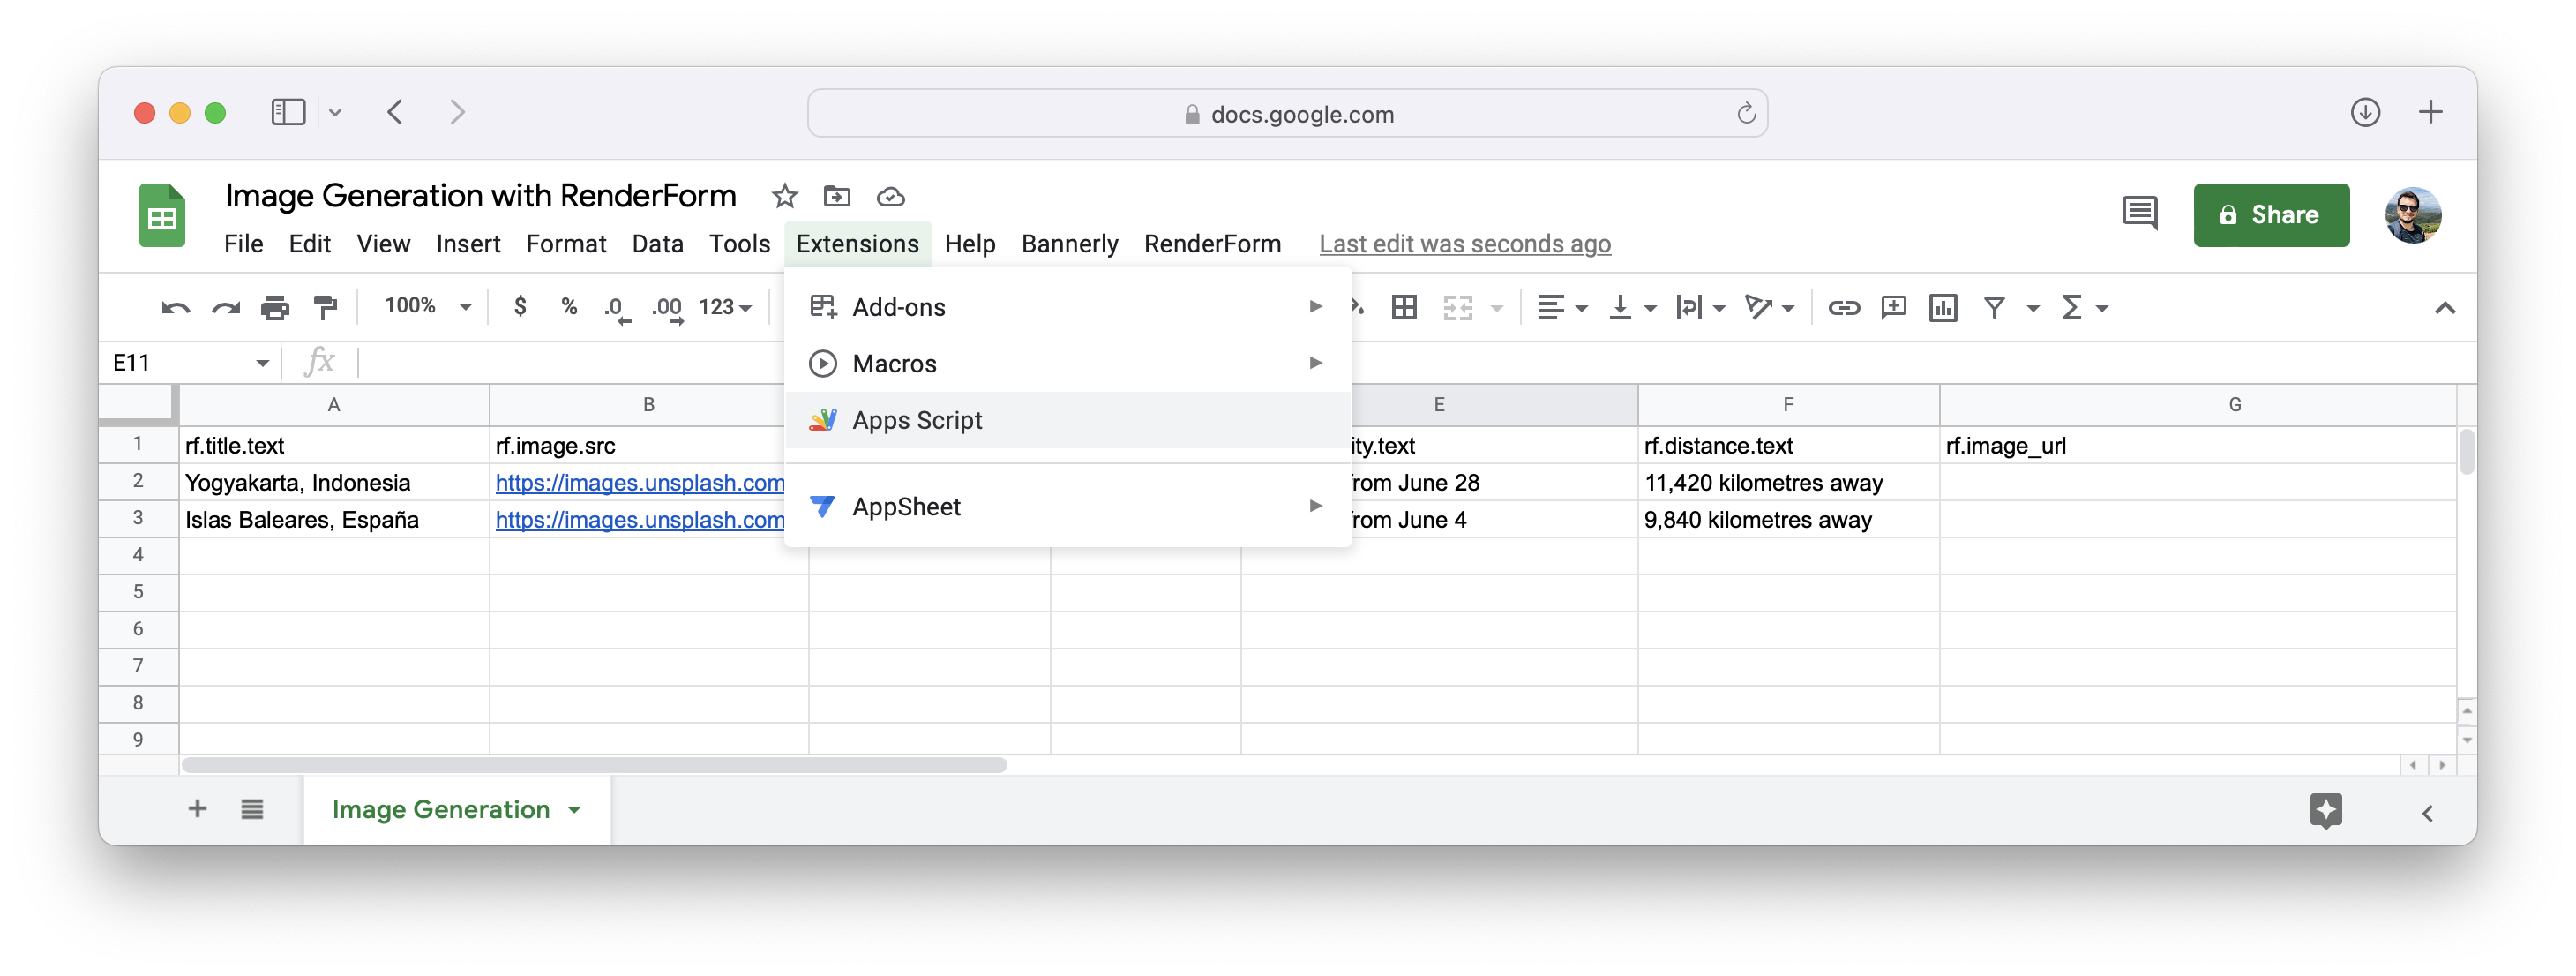 Open Google Sheets extension